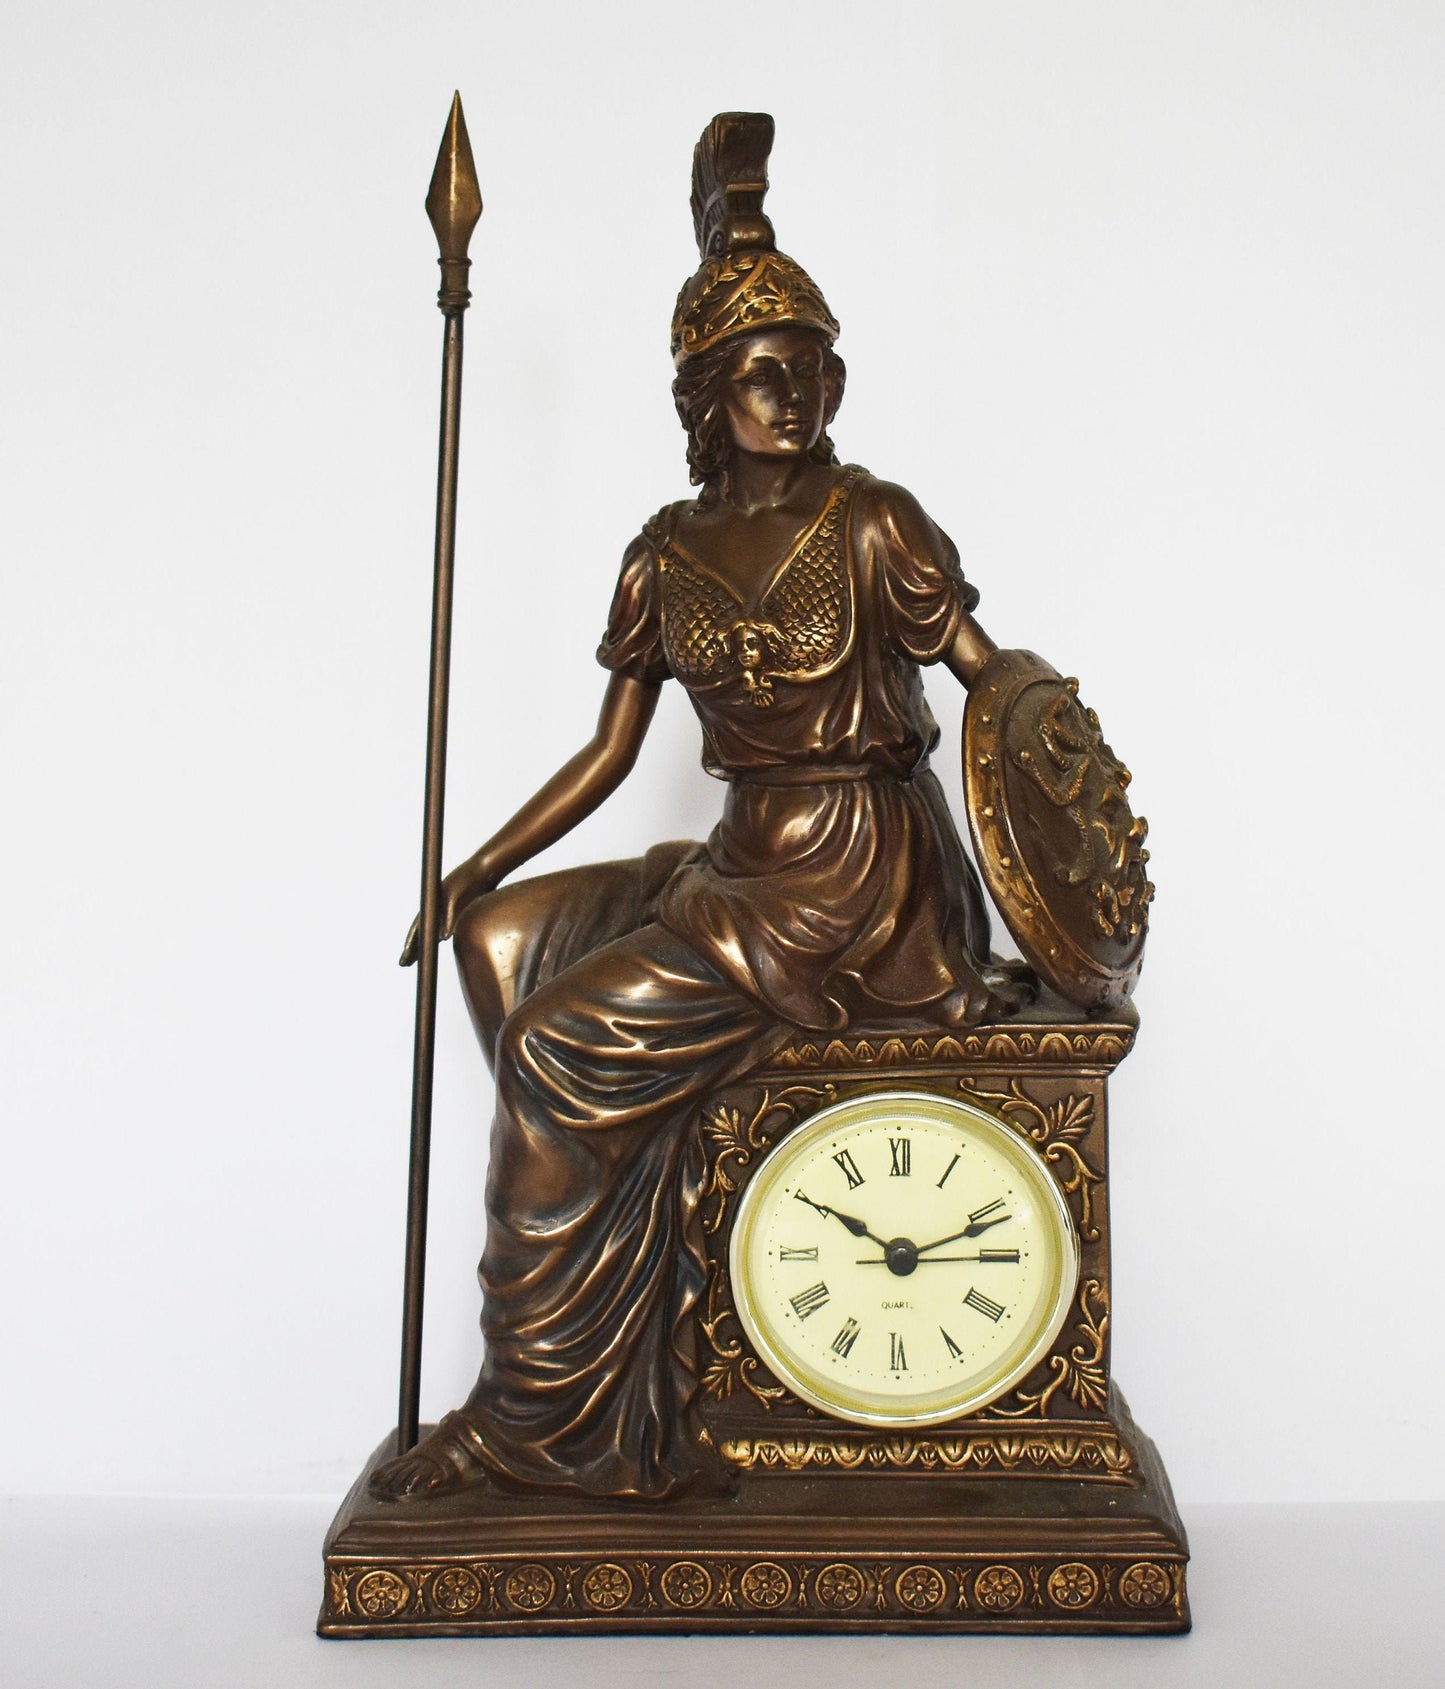 Athena Minerva with Clock - Greek Roman goddes of Wisdom, Strength, Strategy, Inspiration, Arts, Crafts, and Skill - Cold Cast Bronze Resin